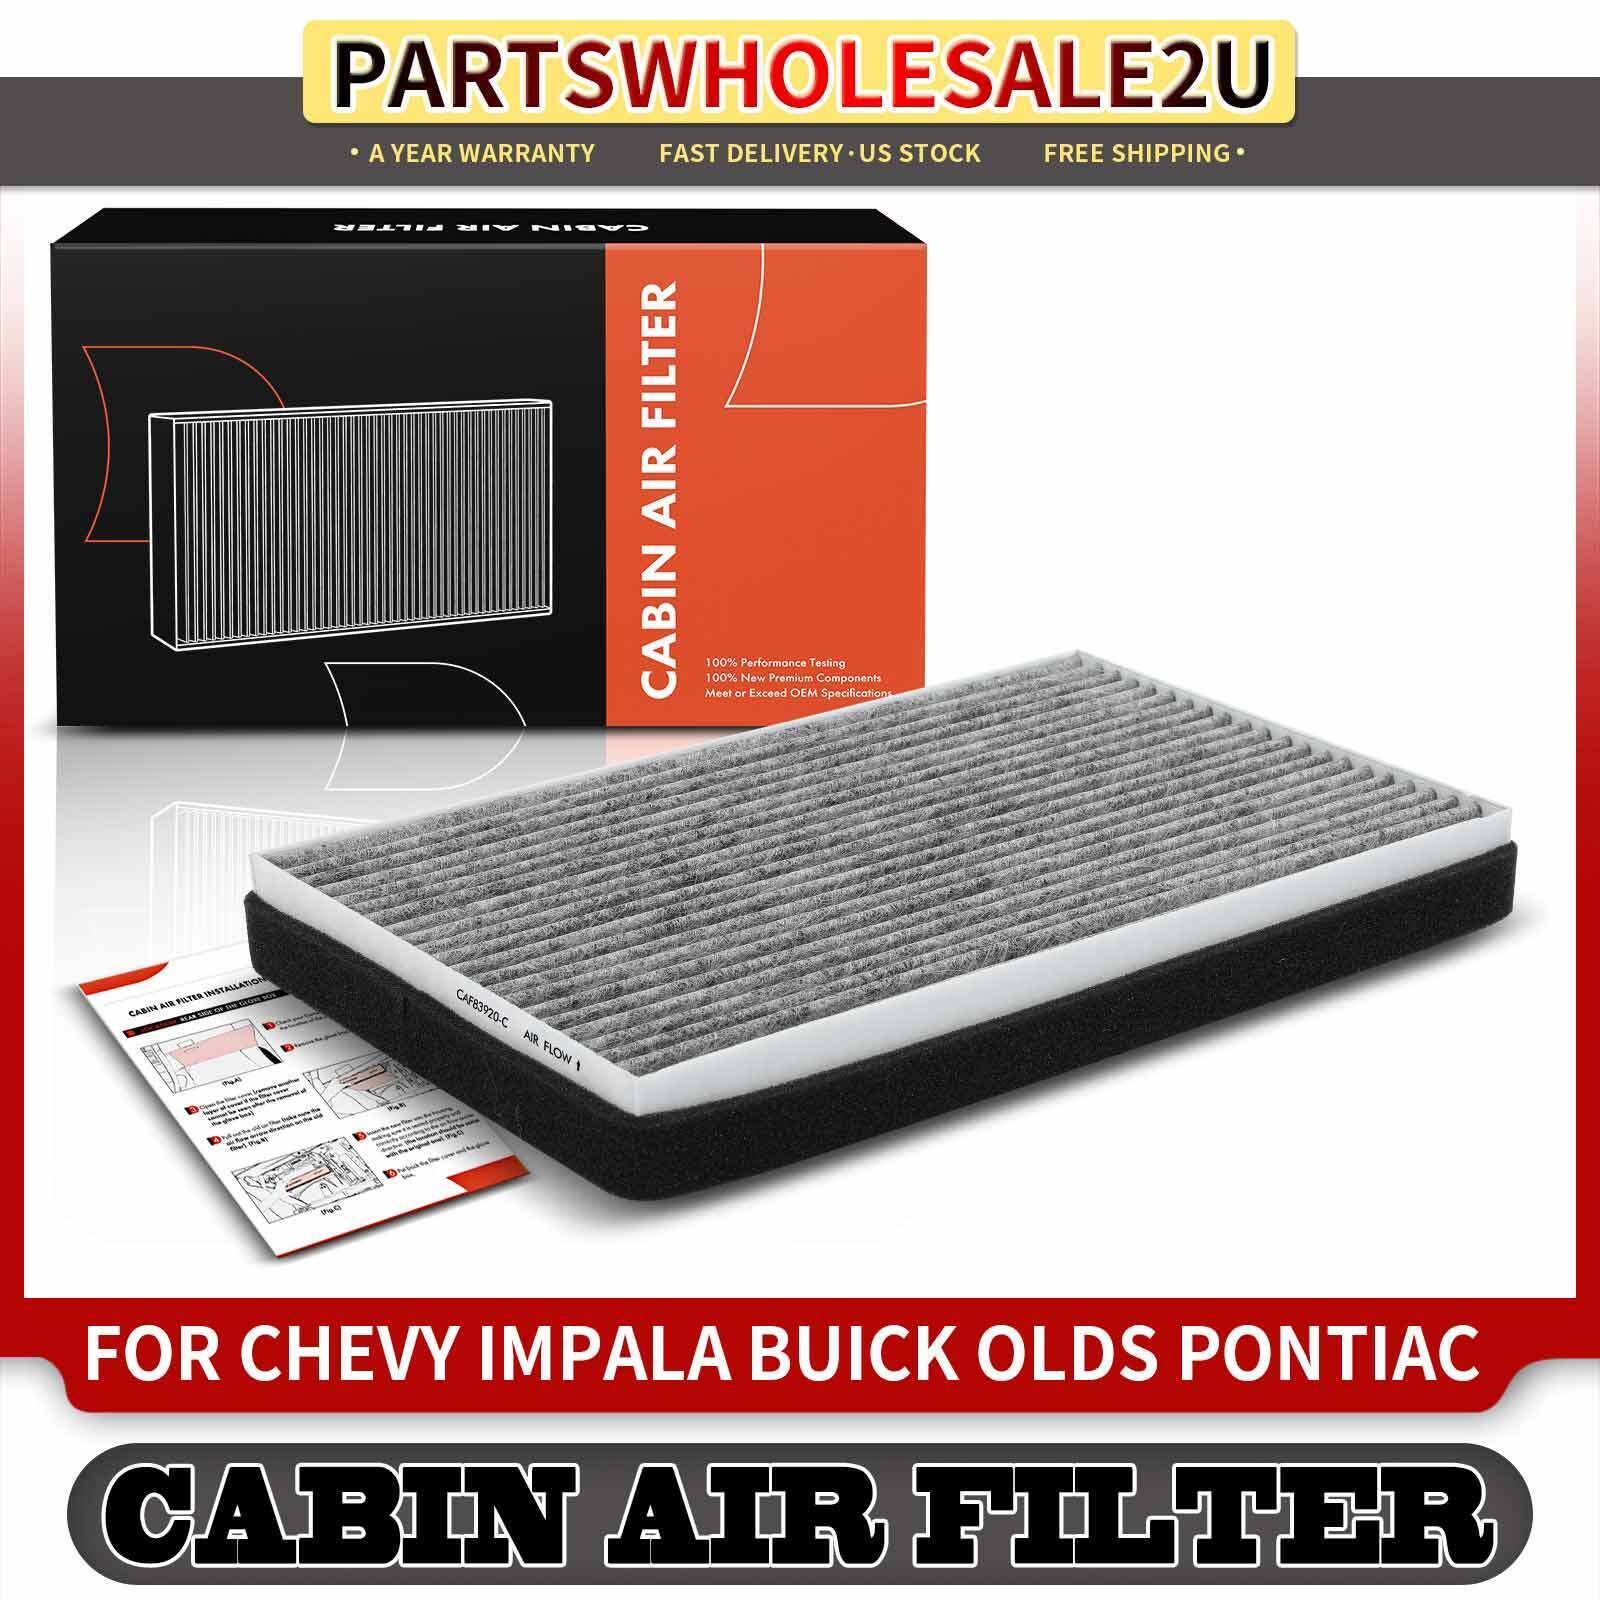 Activated Carbon Cabin Air Filter for Chevrolet Impala Monte Carlo Buick Pontiac